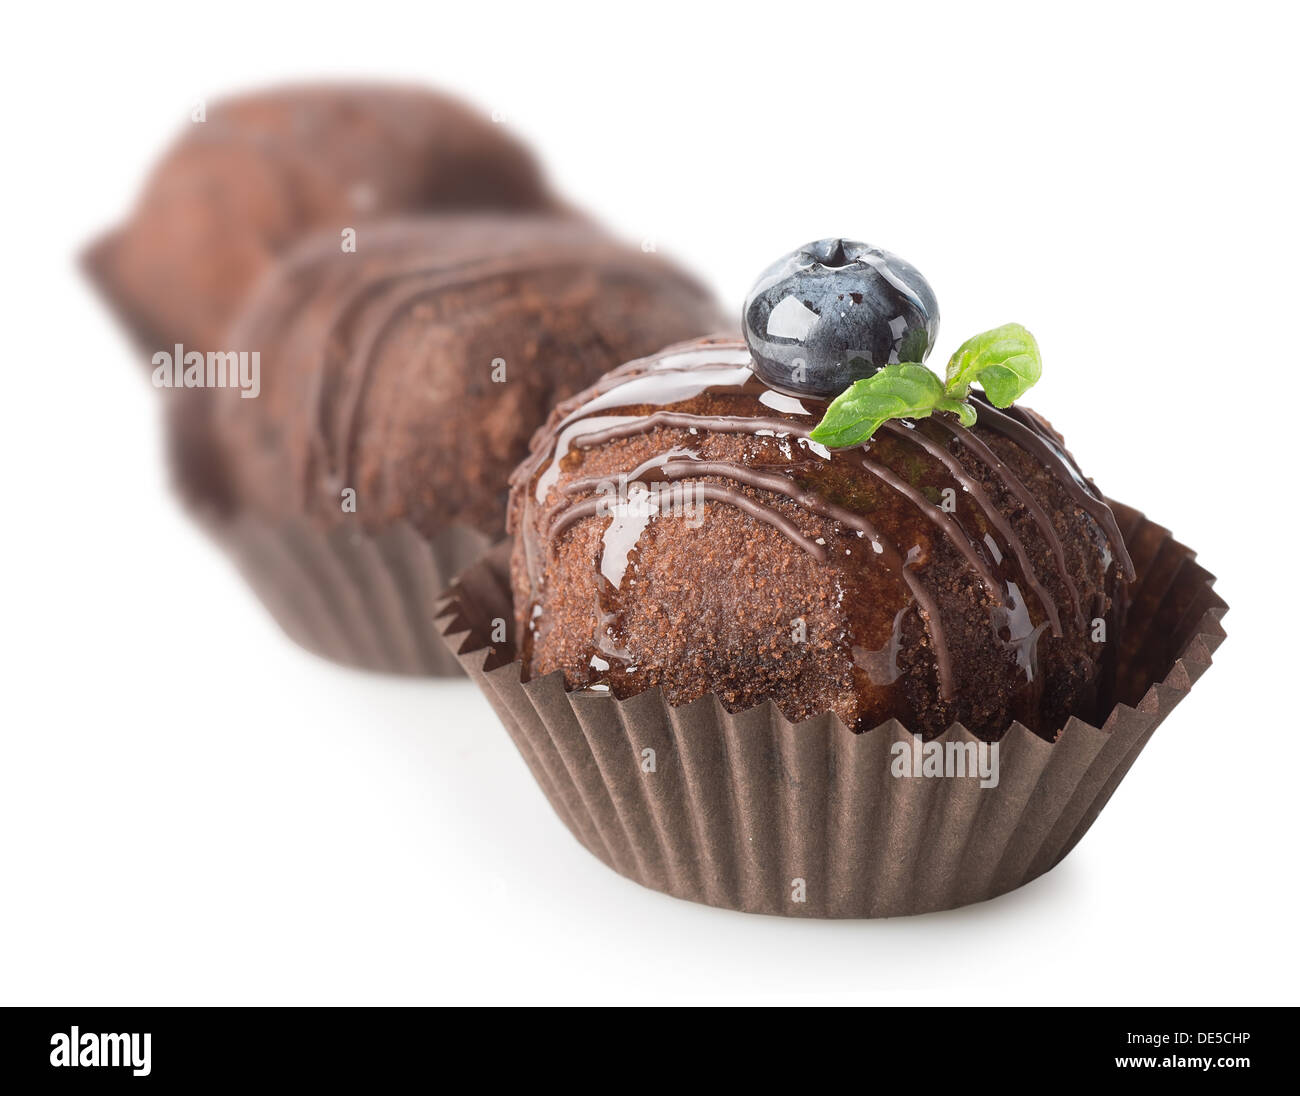 Three chocolate cakes isolated on a white background Stock Photo